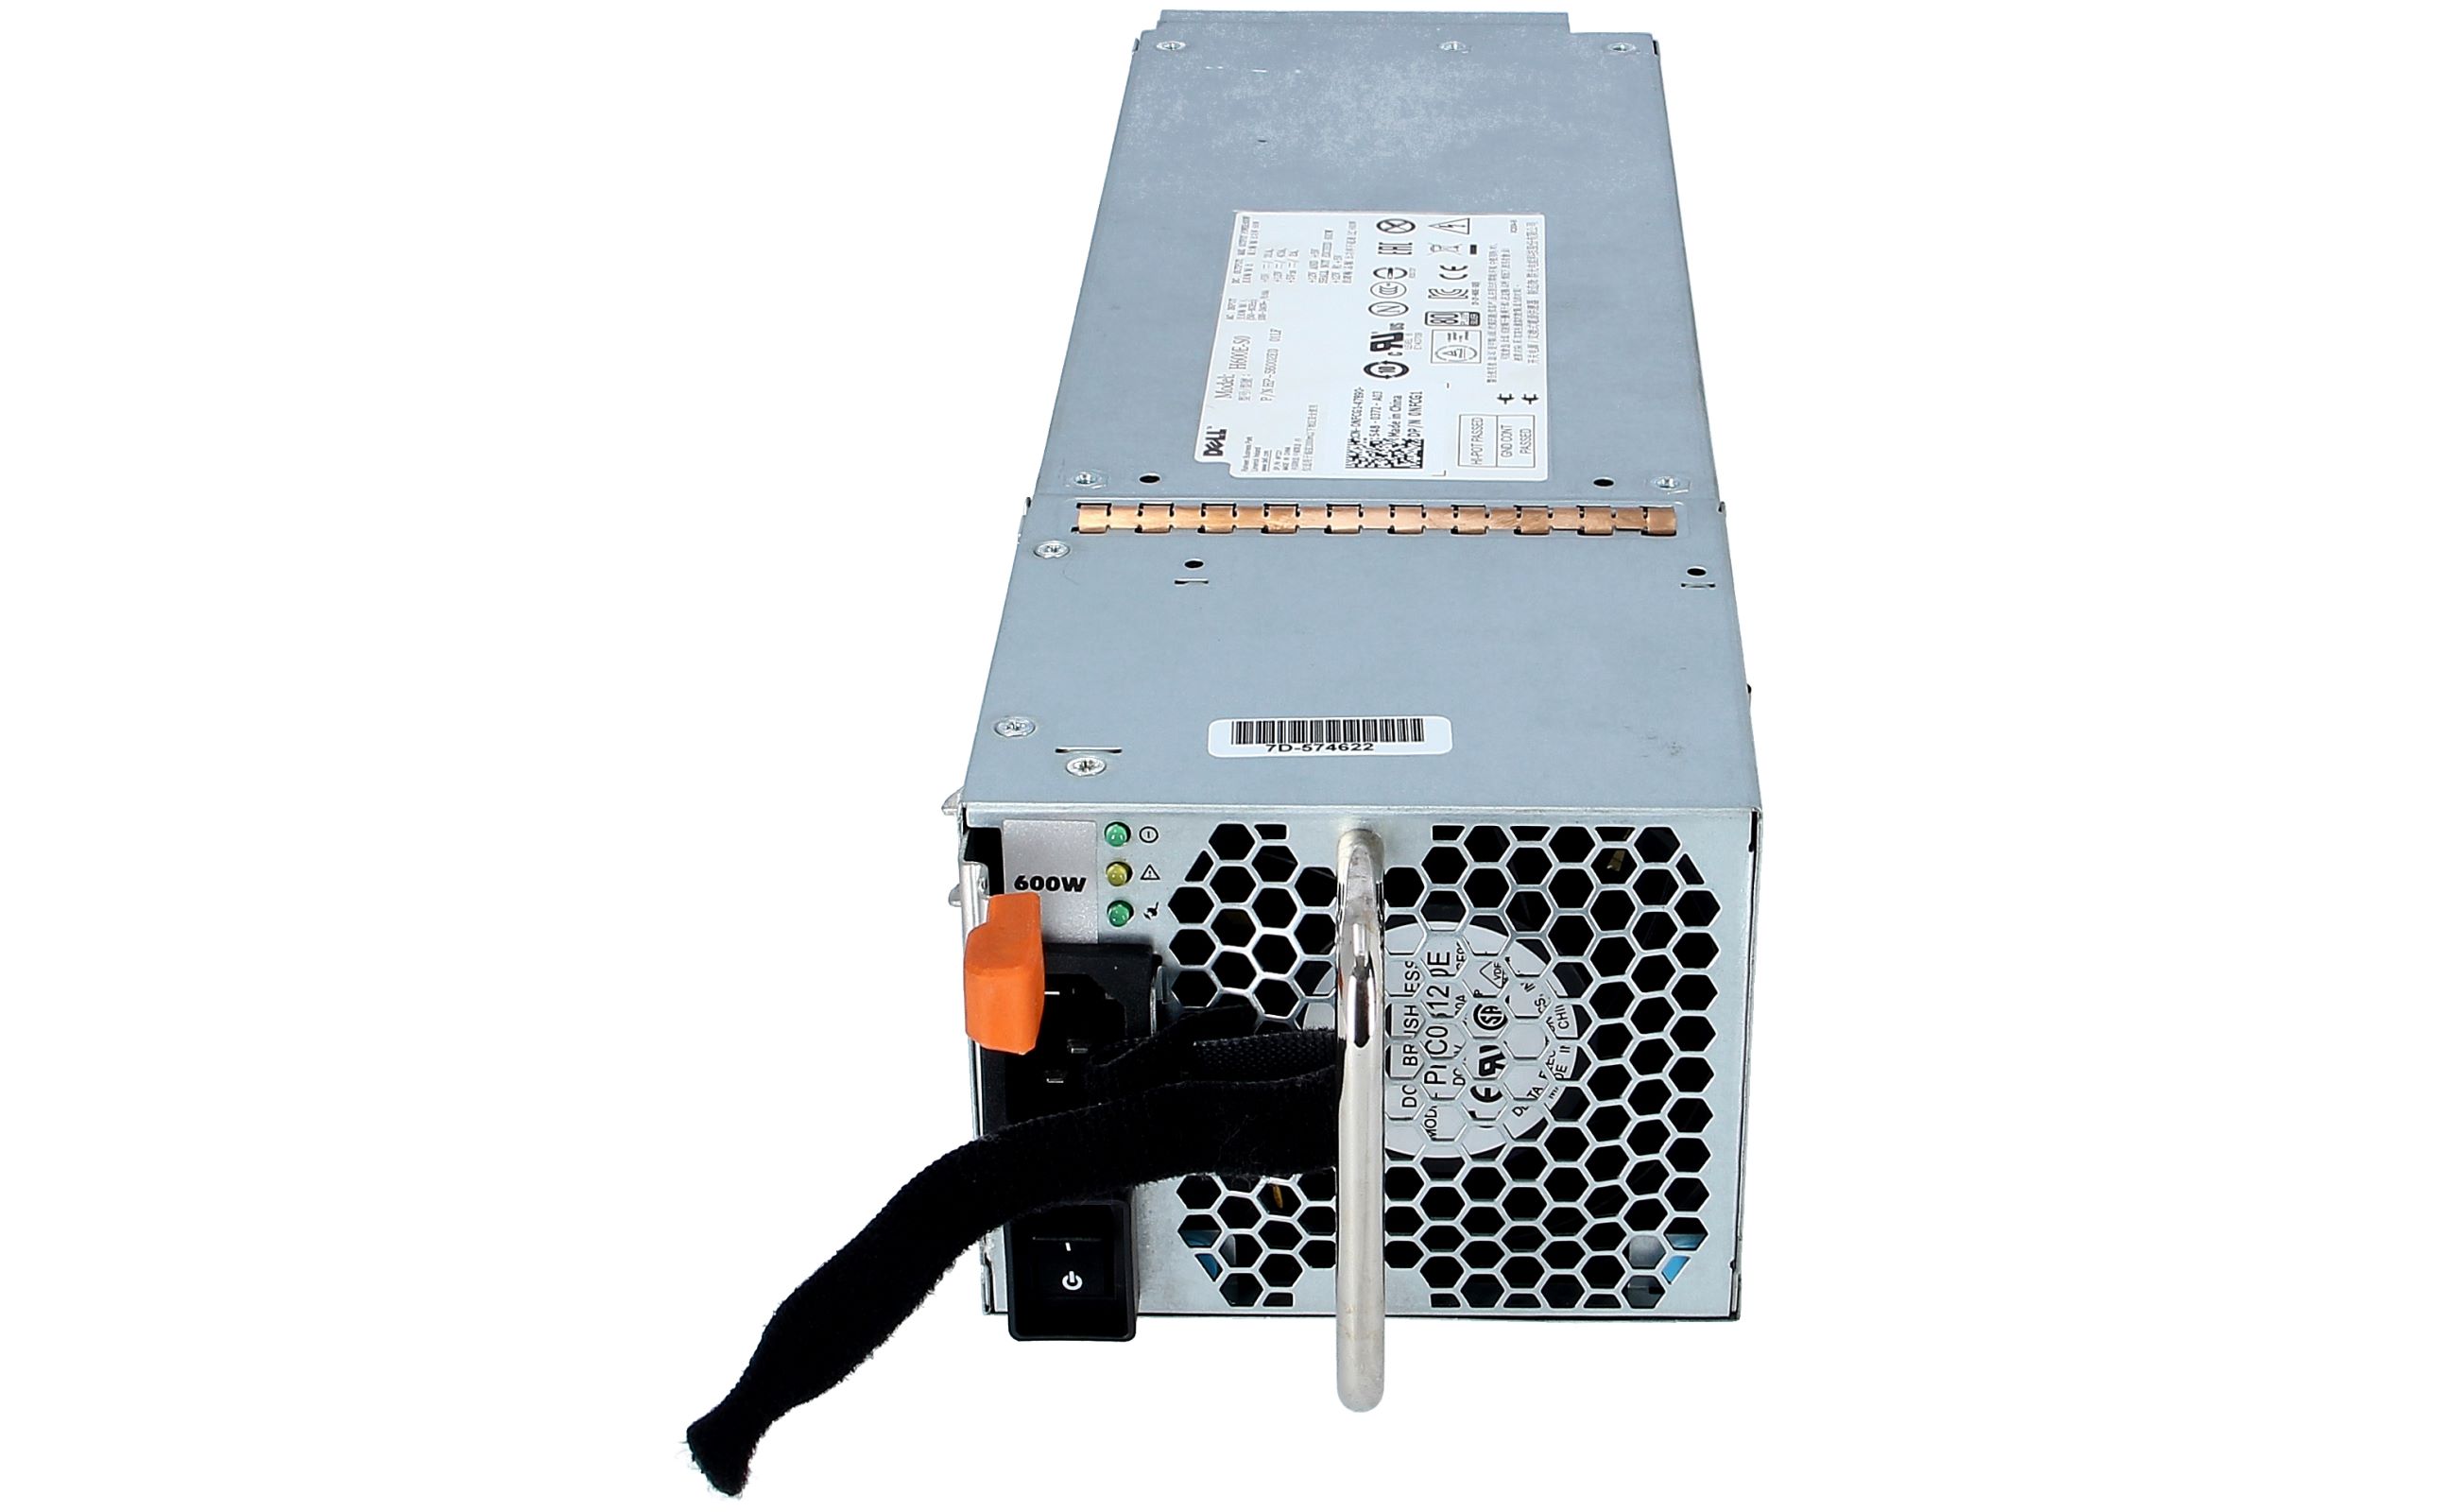 Dell 0NFCG1 PowerVault 600W Power Supply for MD Series Storage Arrays